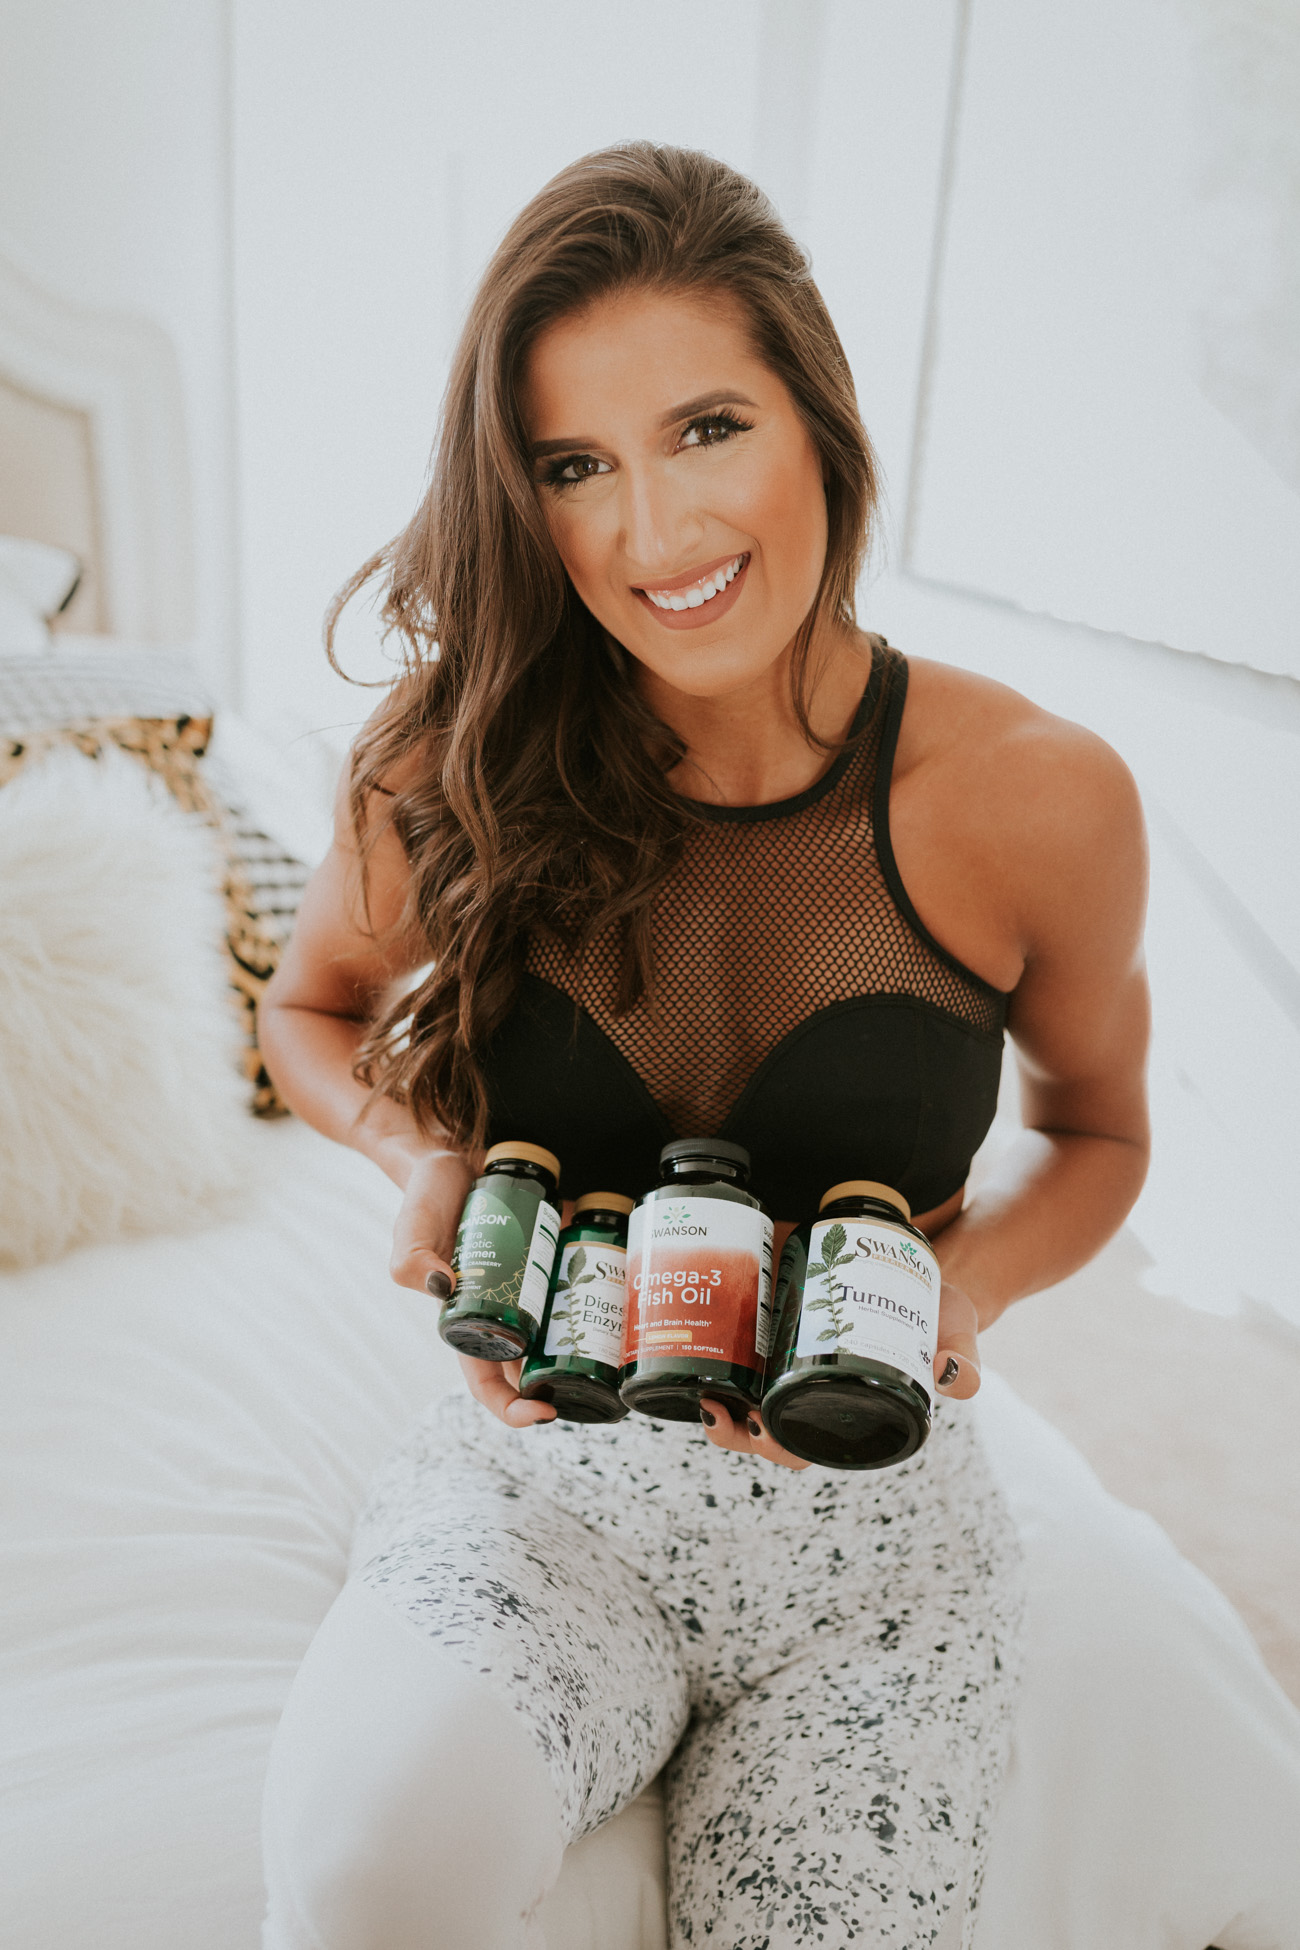 favorite vitamins, favorite supplements, top 5 favorite vitamins, top five favorite vitamins and supplements, swanson health, swanson vitamins, swanson vision defense, a southern drawl nutrition, a southern drawl supplements, a southern drawl fitness, fitwithasd, #fitwithasd // grace wainwright a southern drawl